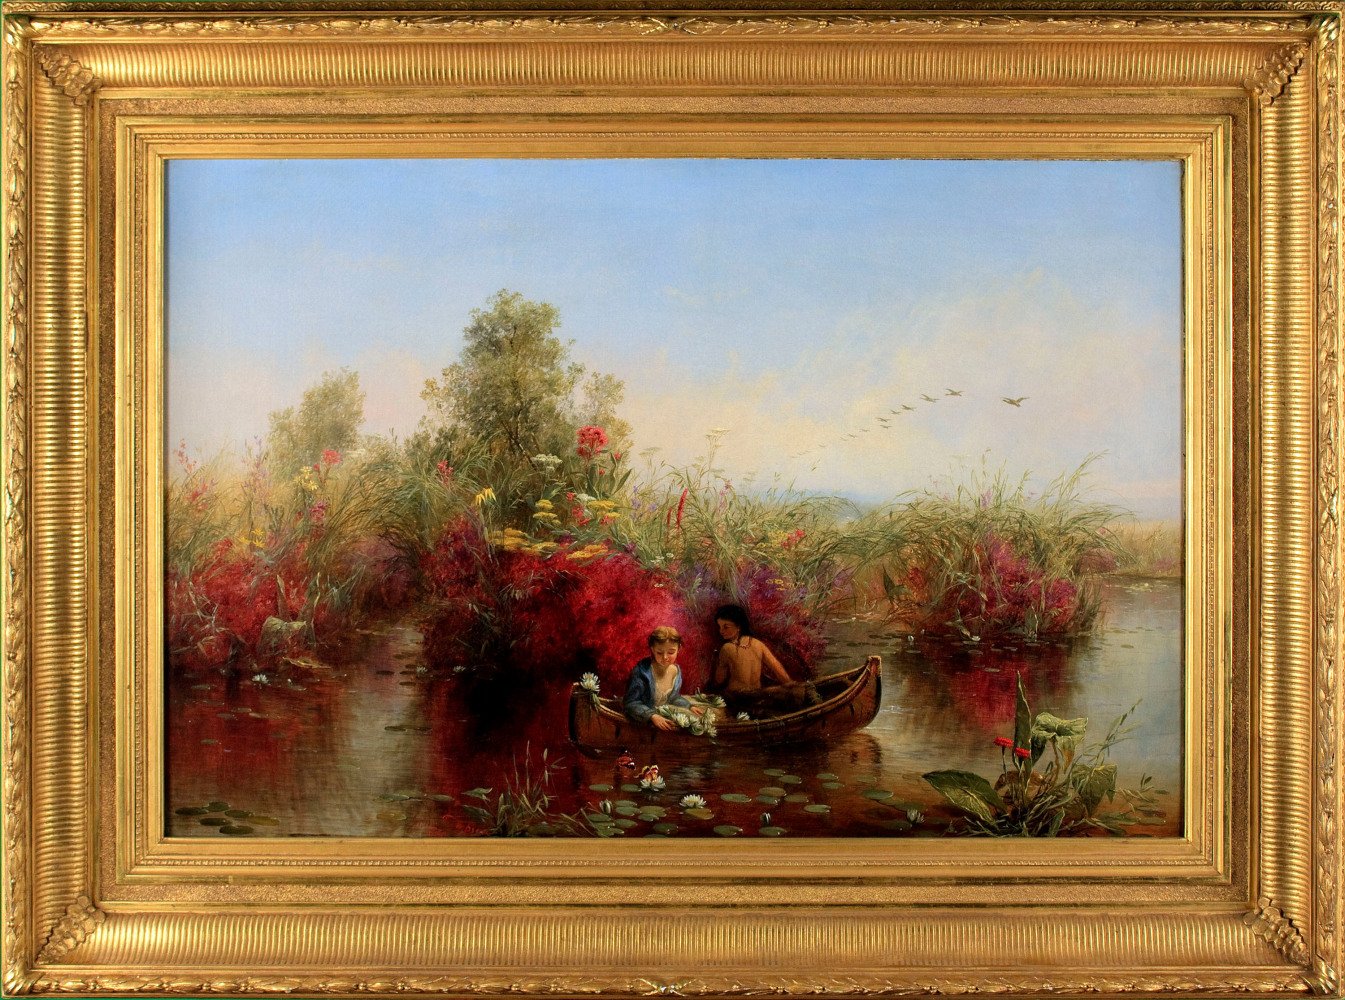 Jerome Thompson (1814–1886). Gathering Waterlilies, 1867. Oil on canvas, 24 ¼ x 36 ¼ in. Signed and dated lower left (framed)